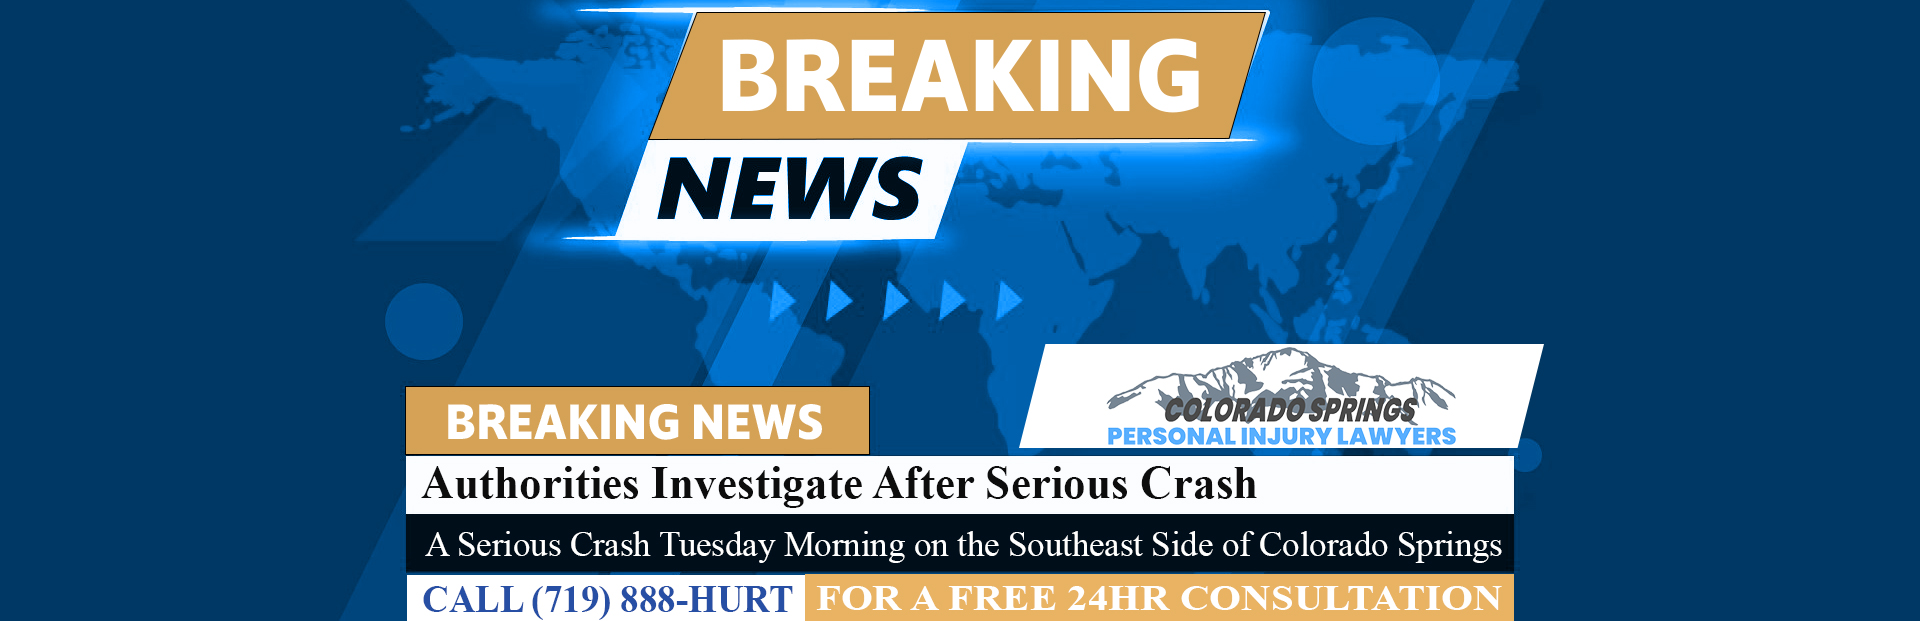 [11-16-23] Authorities Investigate After Serious Crash on the Southeast Side of the City